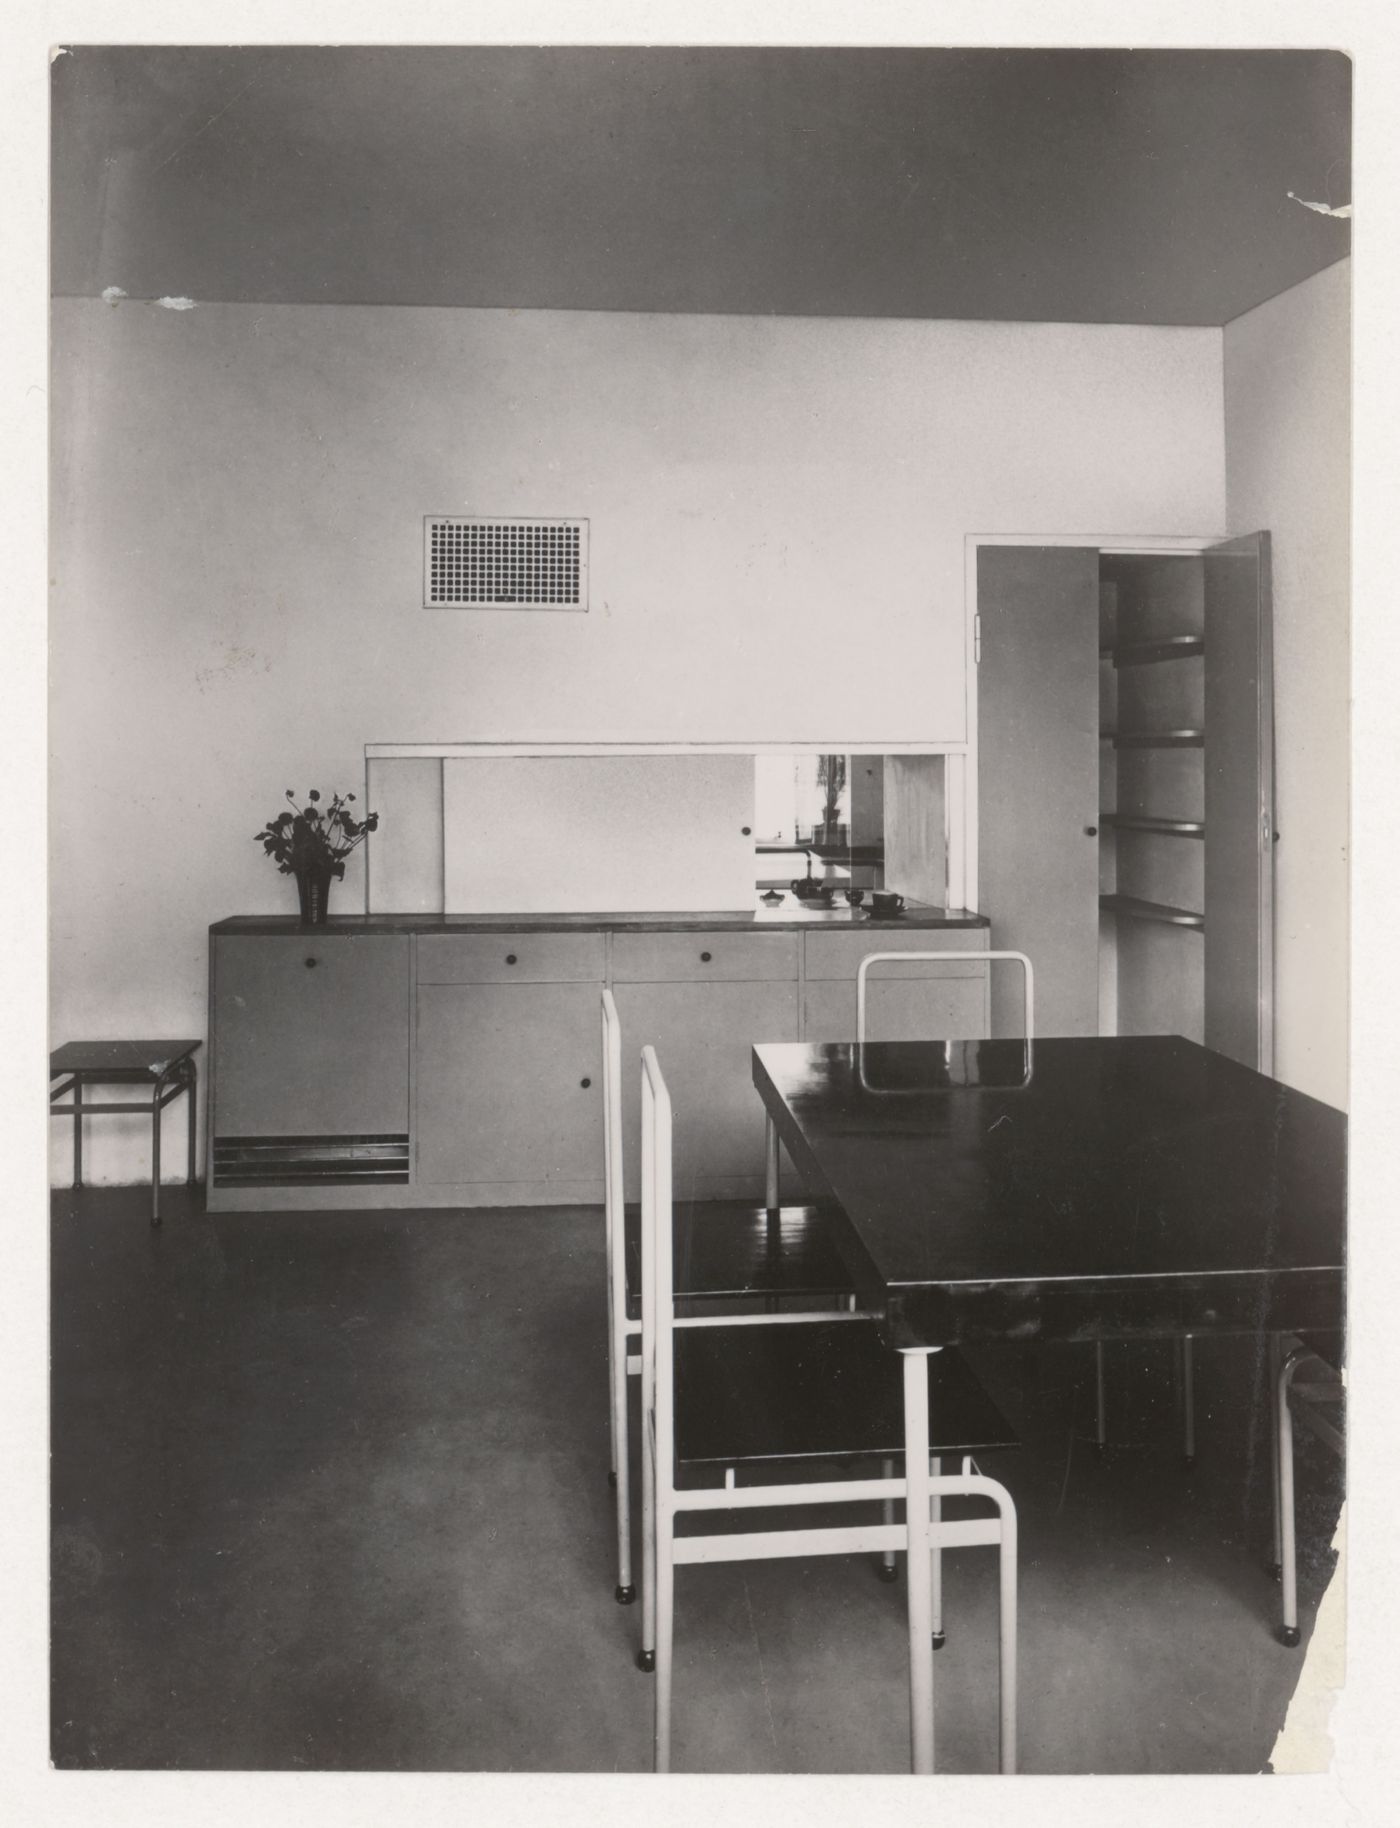 Interior view of the dining room of House 8 showing a table, chairs, buffet and serving window open to the kitchen, Weissenhofsiedlung, Stuttgart, Germany